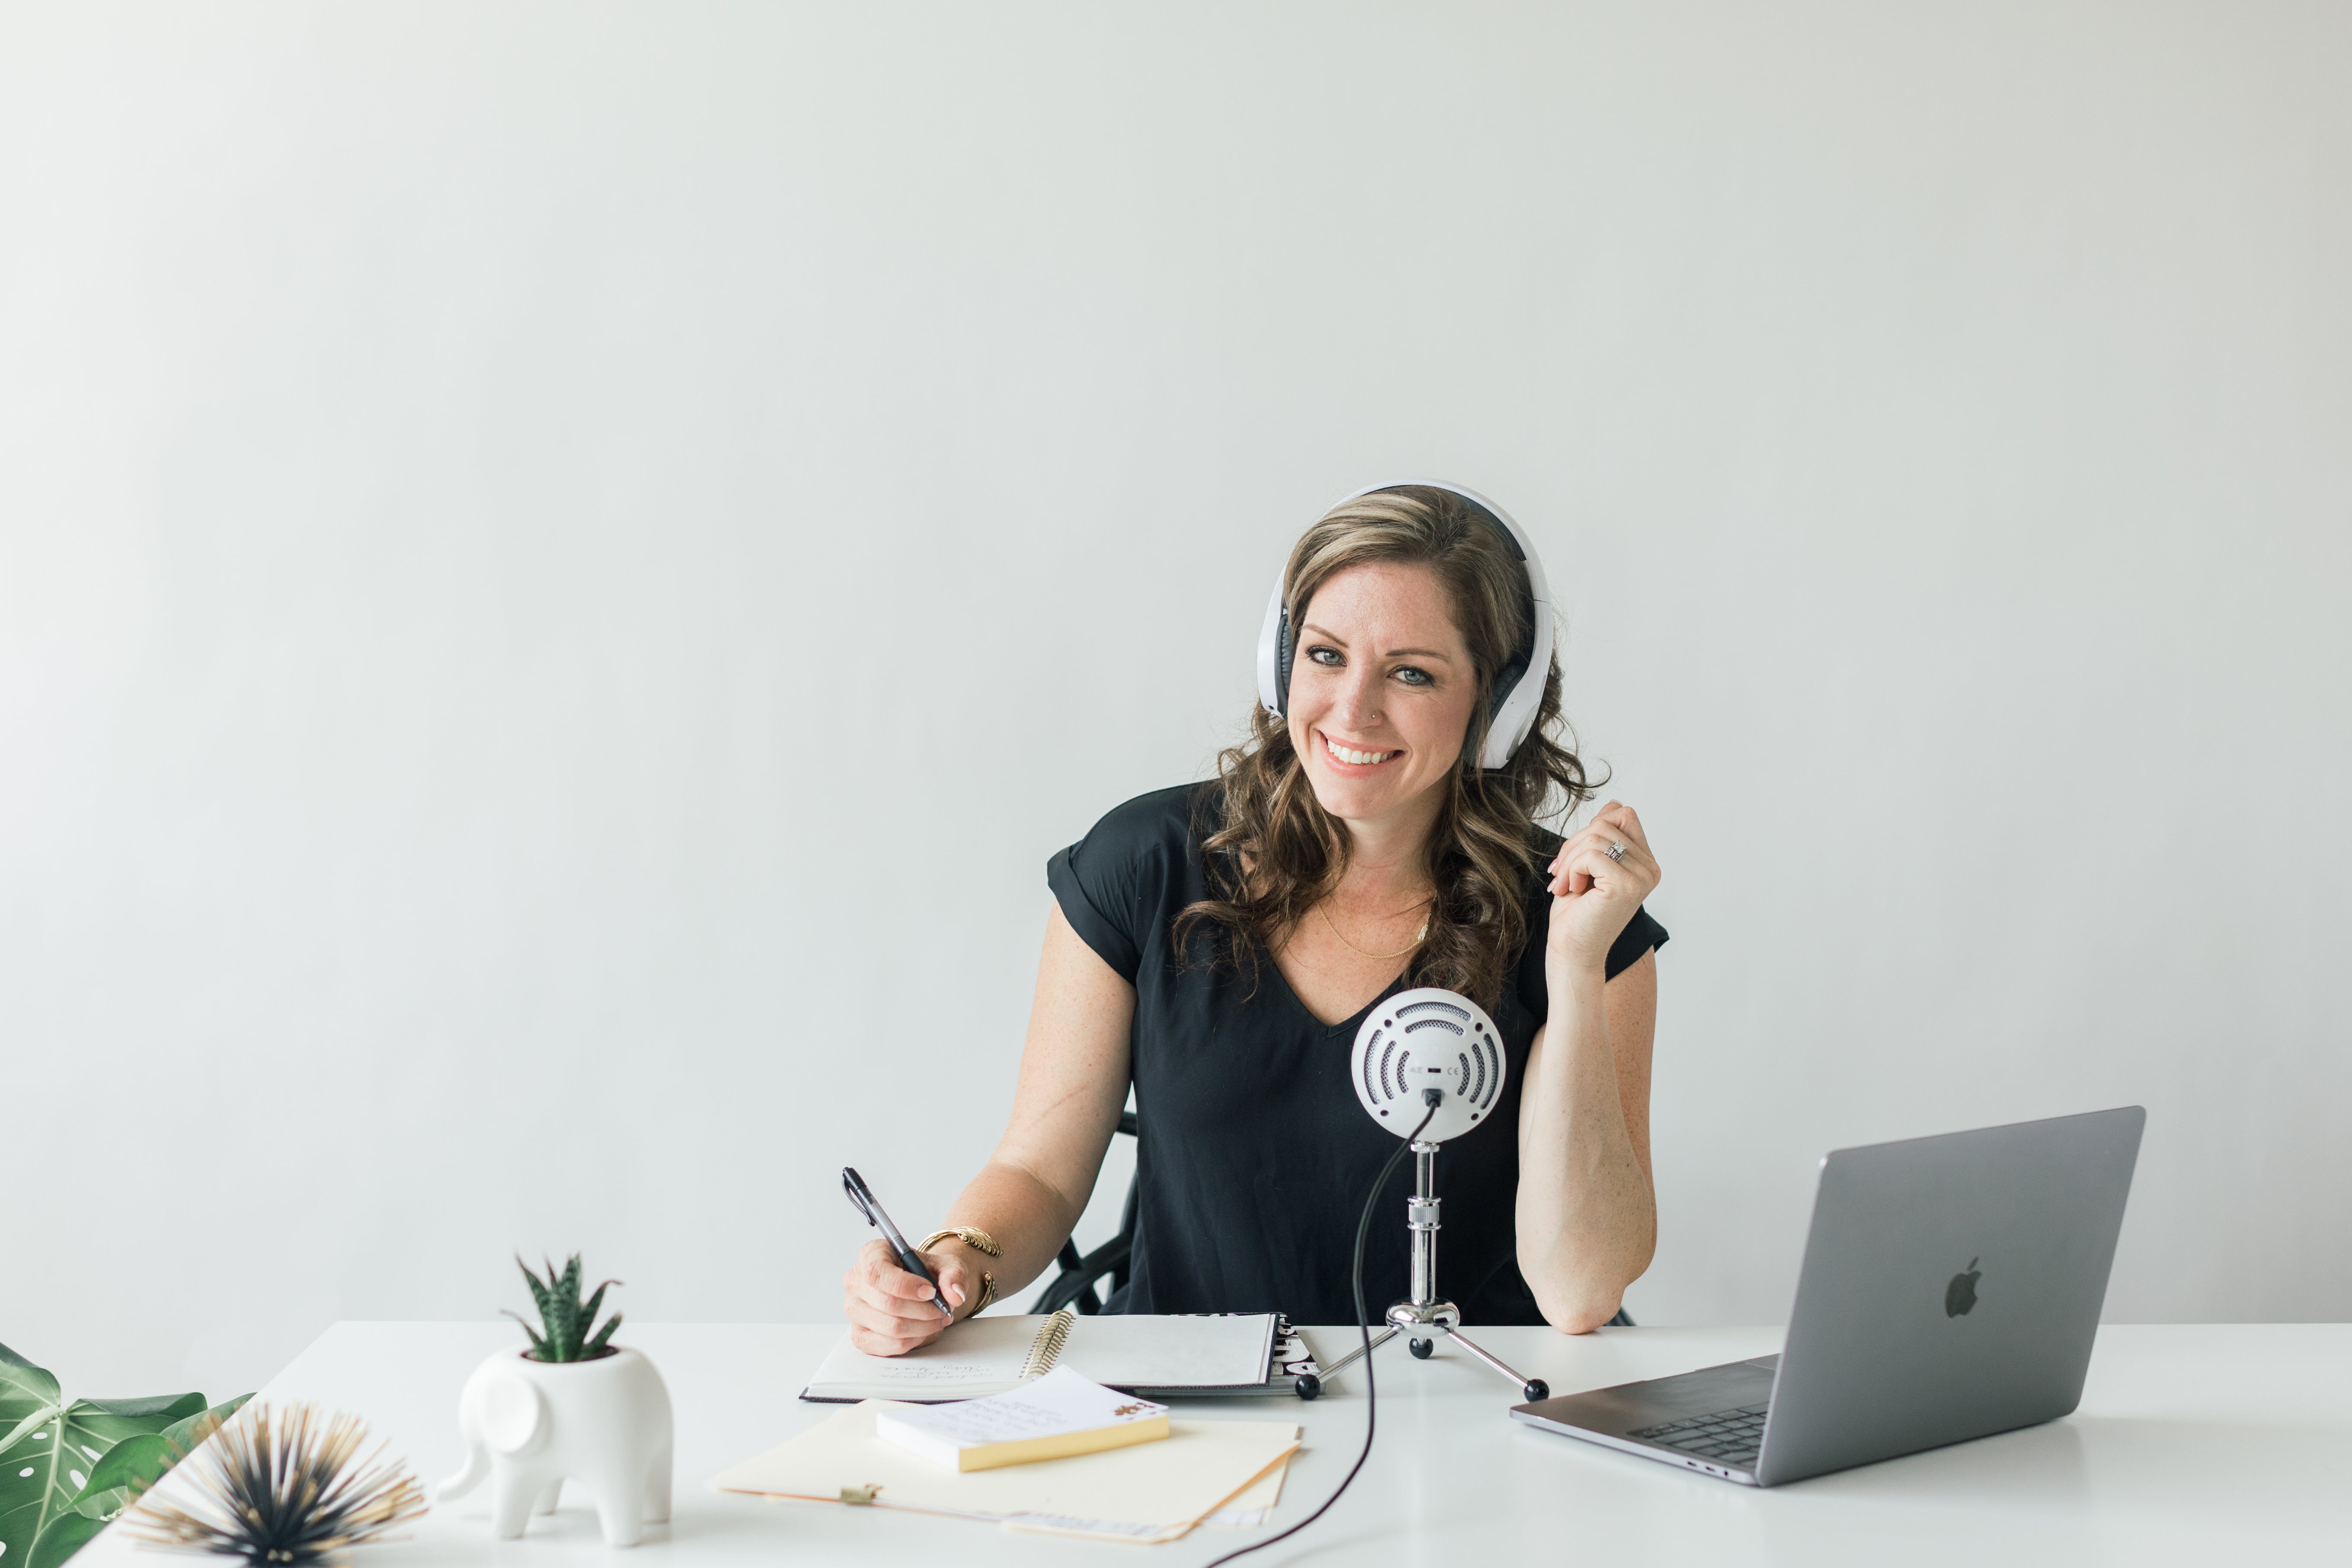 Photography Lawyer Rachel Brenke working at her desk with macbook and podcast setup